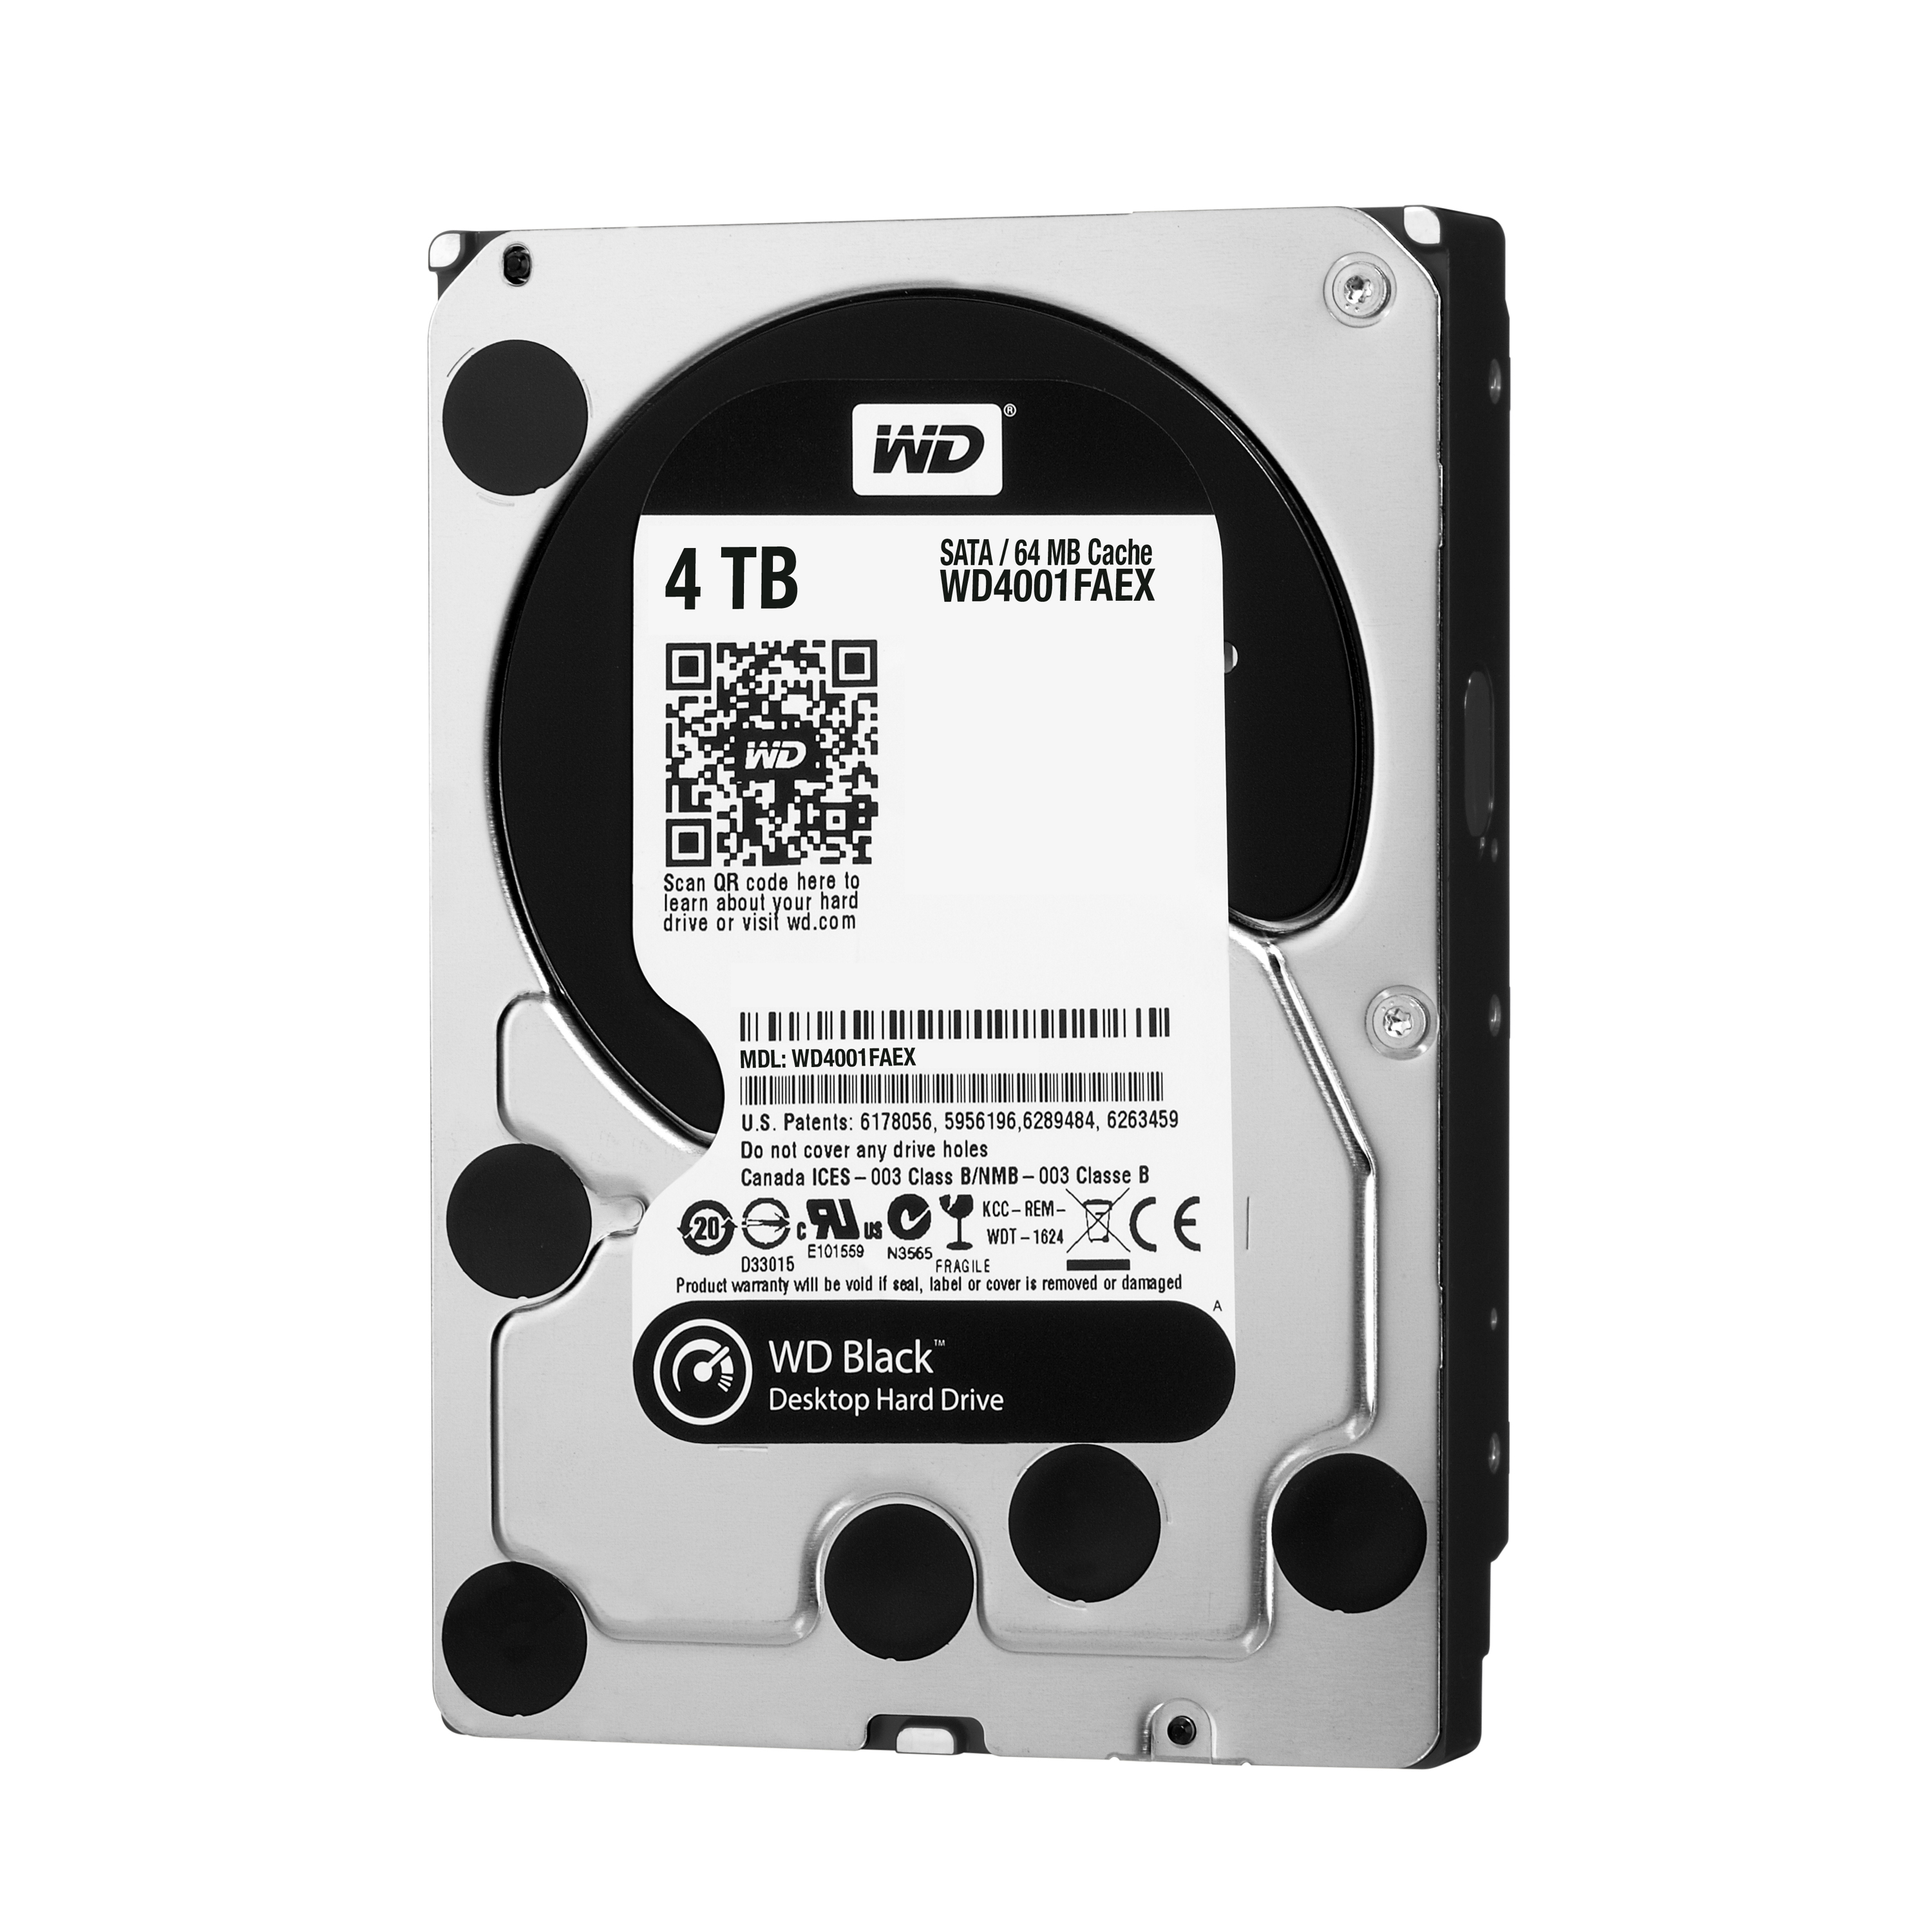 WD Releases 4TB Version of High-Performance Drive